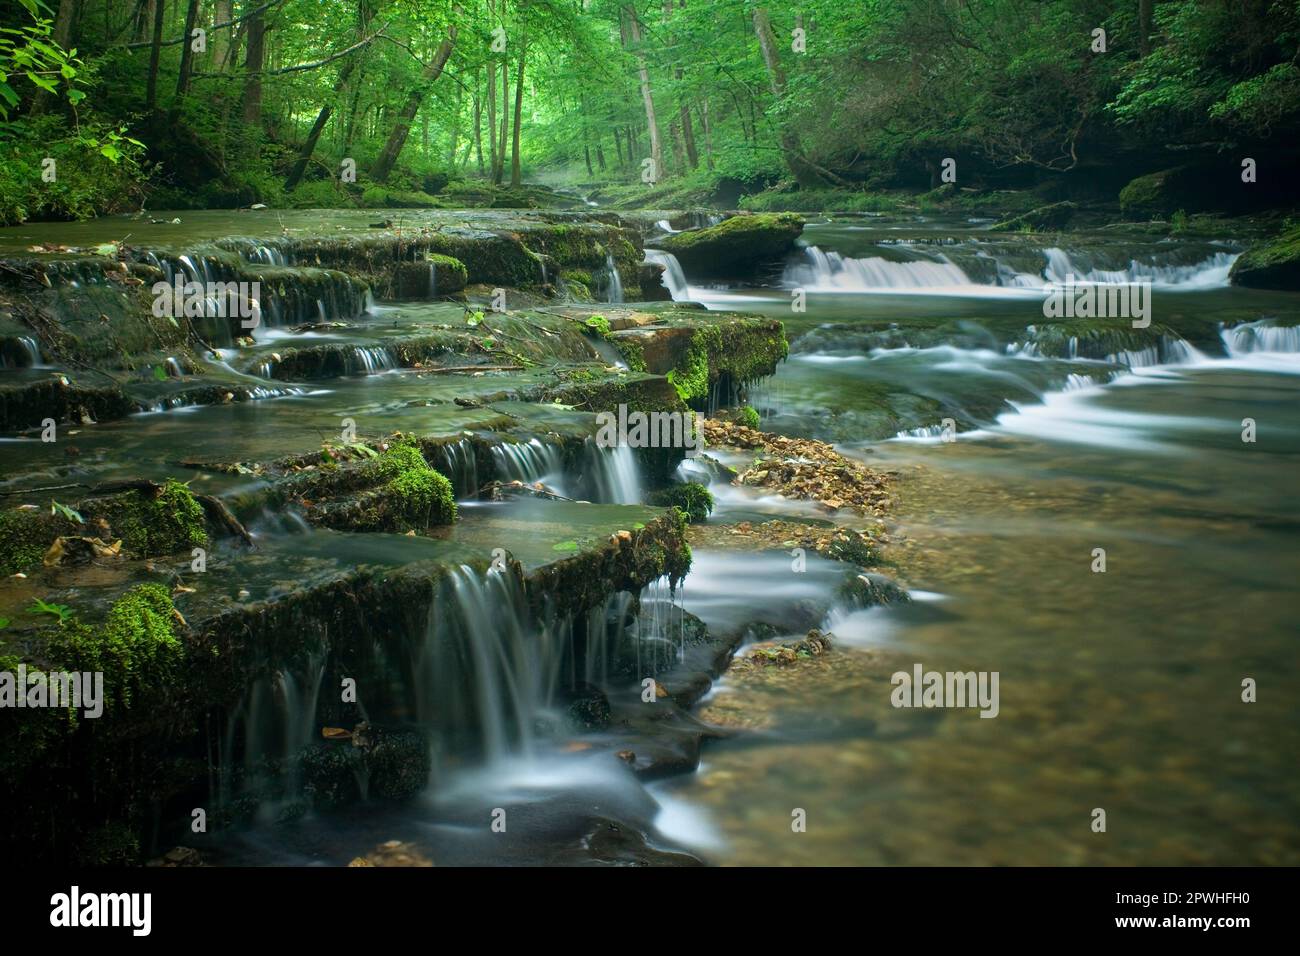 Waterfall, Green Moss, Forest, Short Springs Natural Area, Tennessee Stock Photo